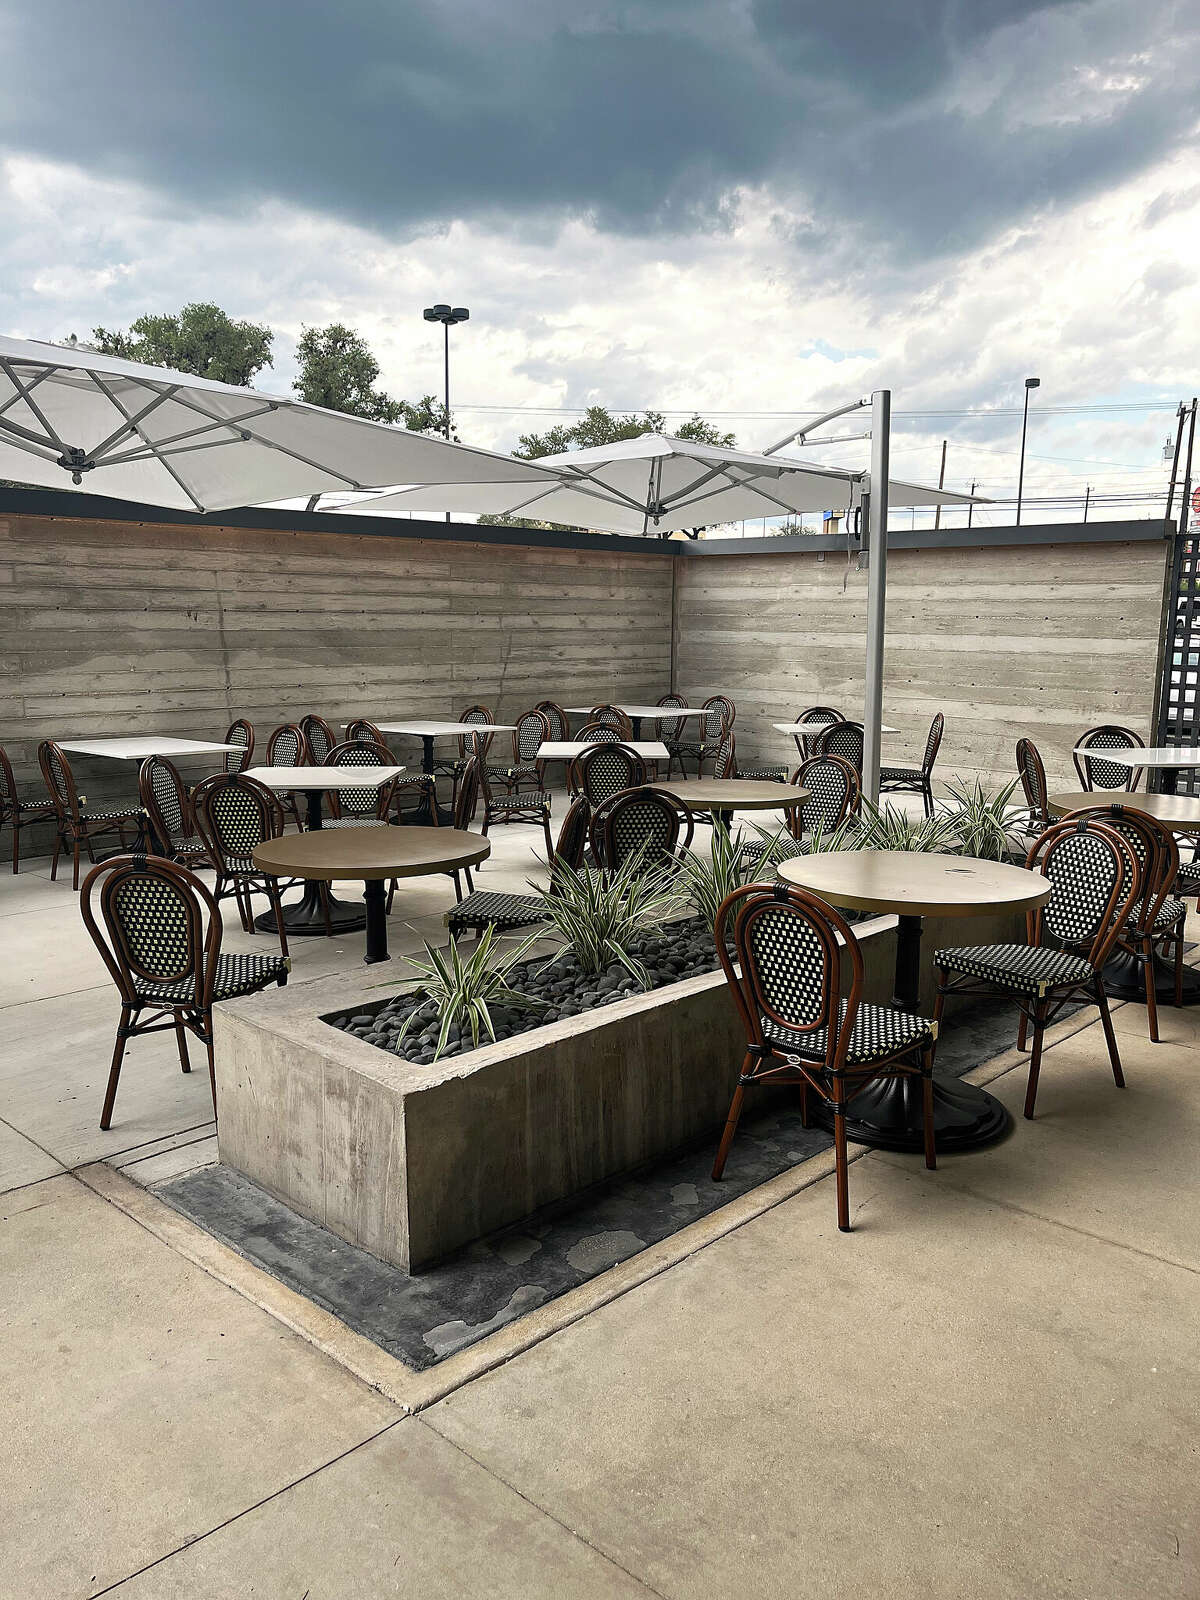 The Italian restaurant Nonna Osteria 1604 from the owners of Silo and La Fogata is set to open today near Stone Oak in San Antonio. The space includes a walled garden courtyard.